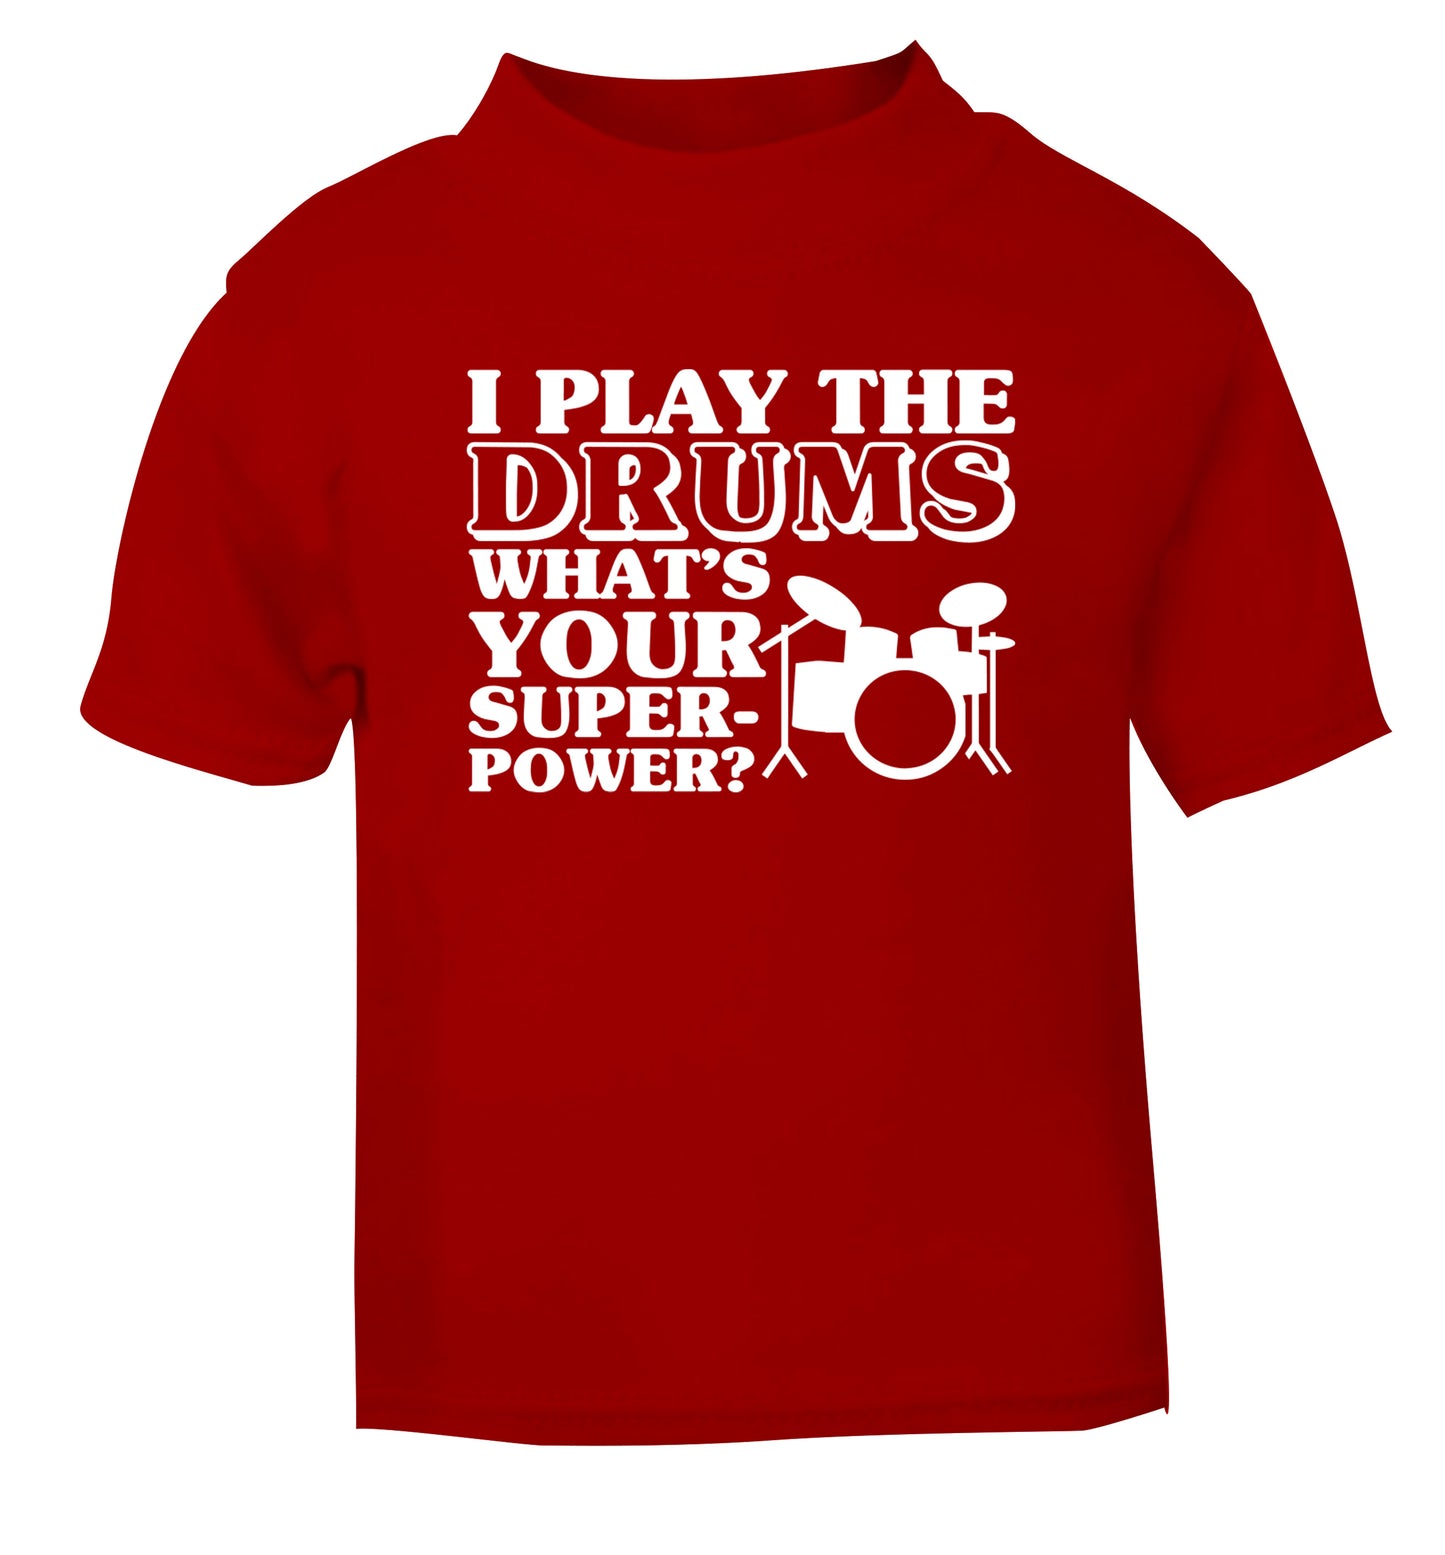 I play the drums what's your superpower? red Baby Toddler Tshirt 2 Years